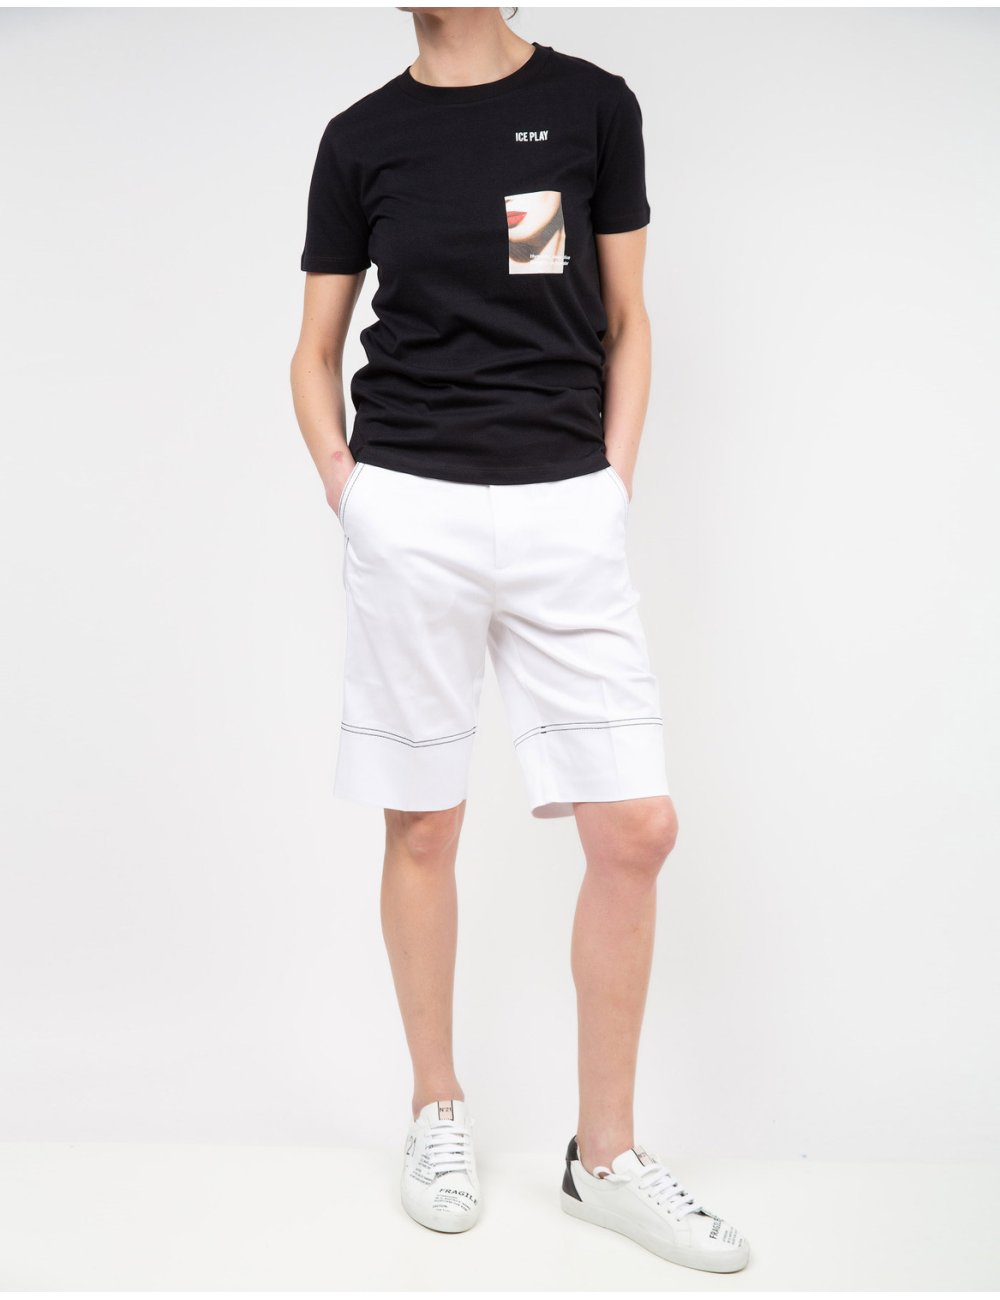 SS21 T-shirt con stampa